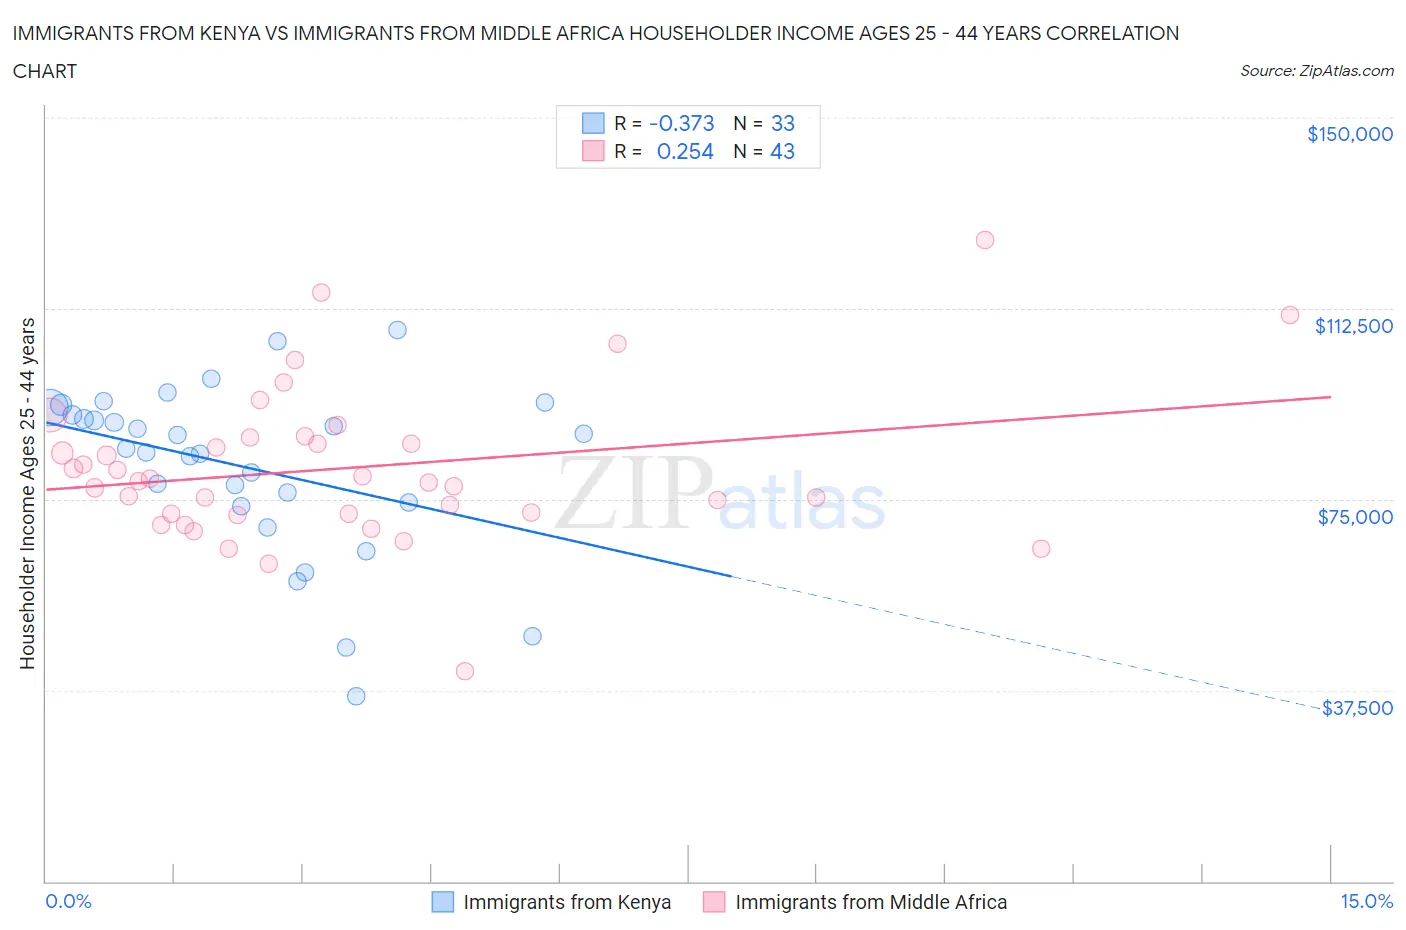 Immigrants from Kenya vs Immigrants from Middle Africa Householder Income Ages 25 - 44 years